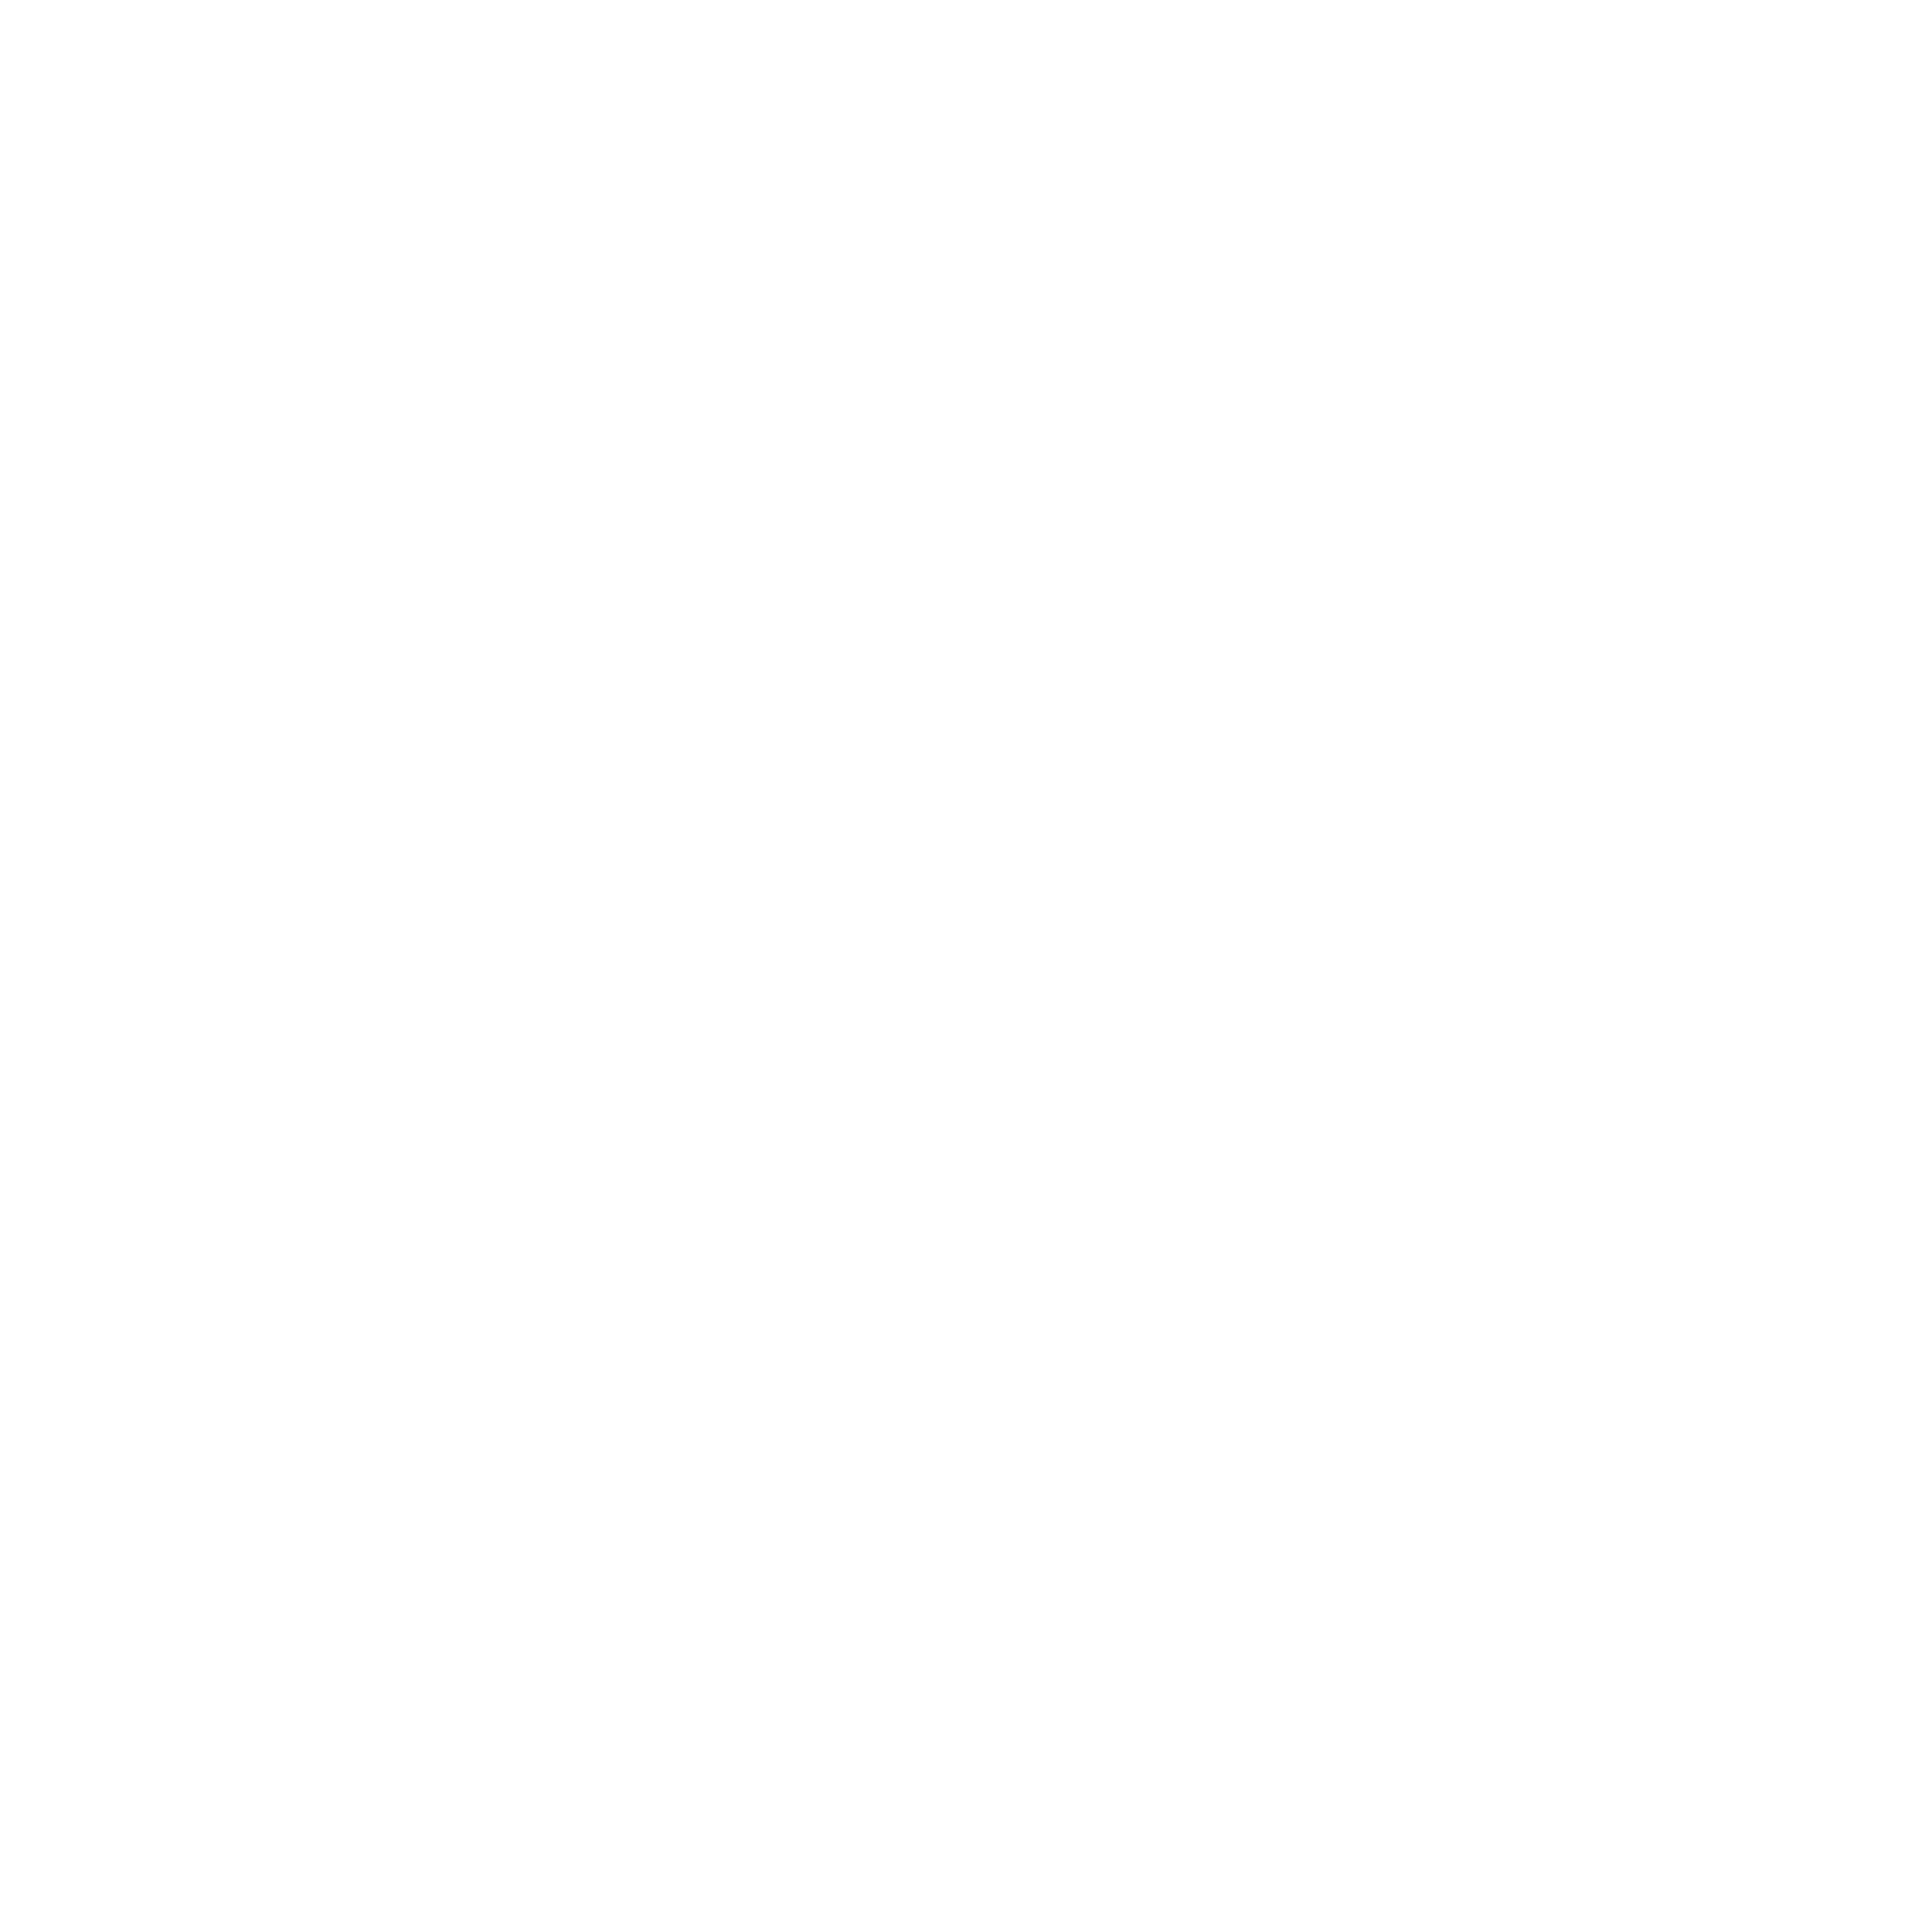 Black and white logo for a photography studio.